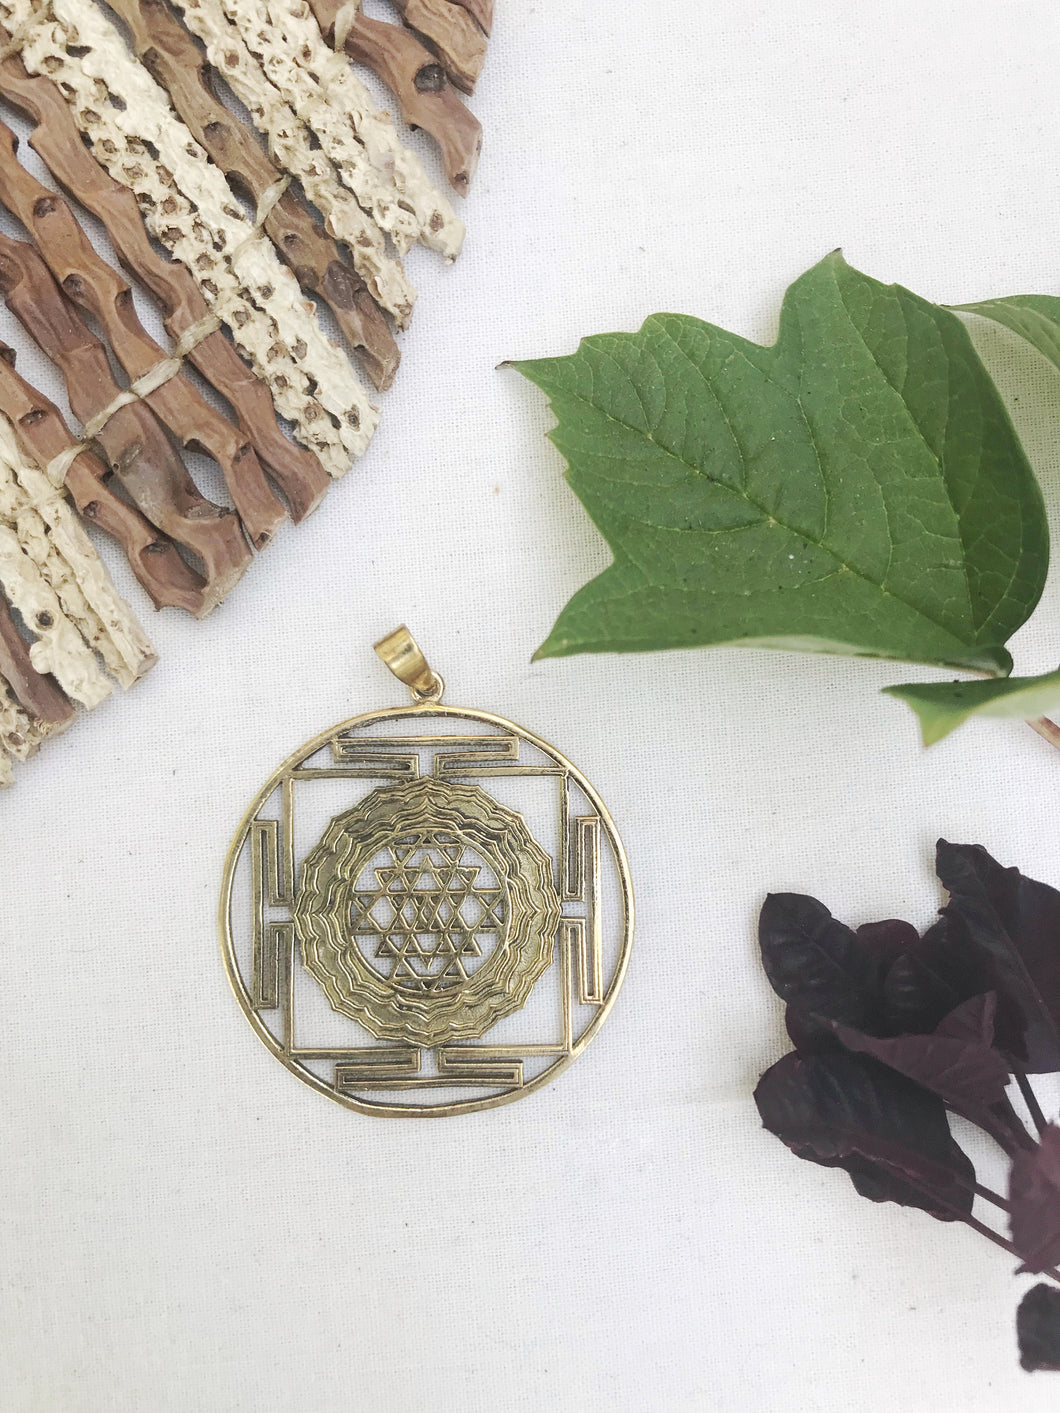 Sri Yantra Mandala Pendant Necklace | With or Without Chain